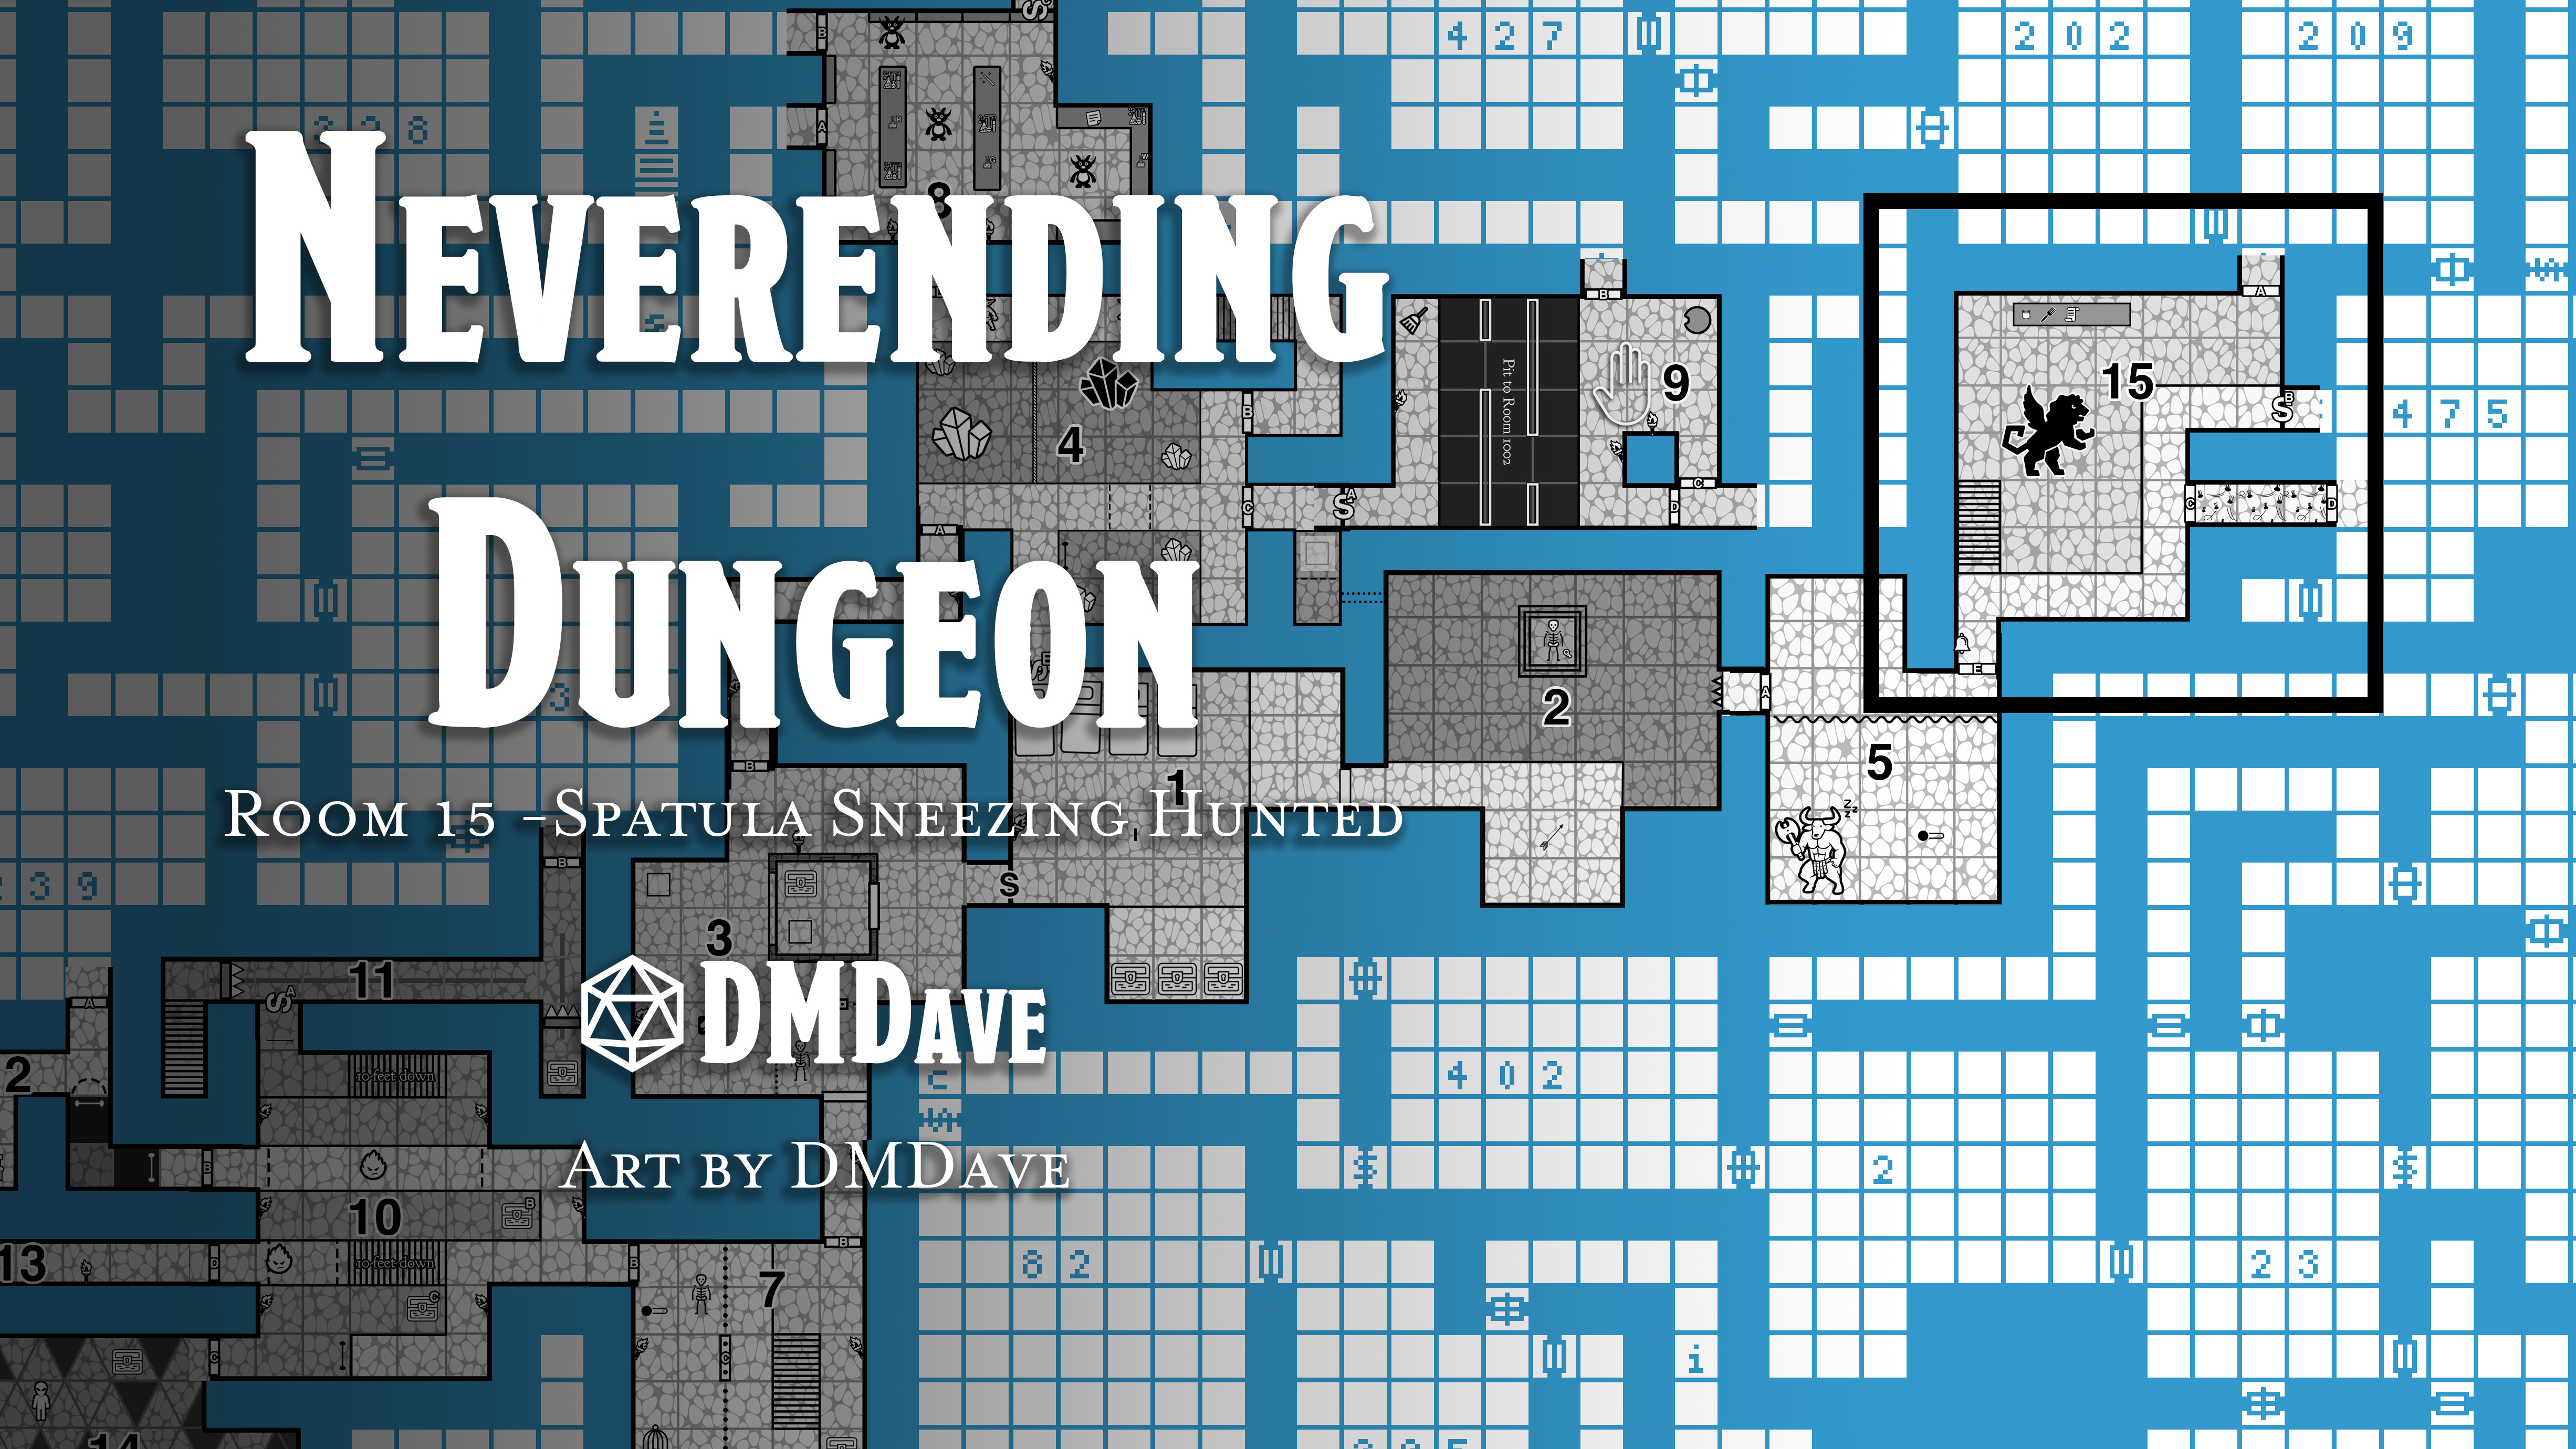 The Neverending Dungeon Room 15 – Spatula Sneezing Hunted